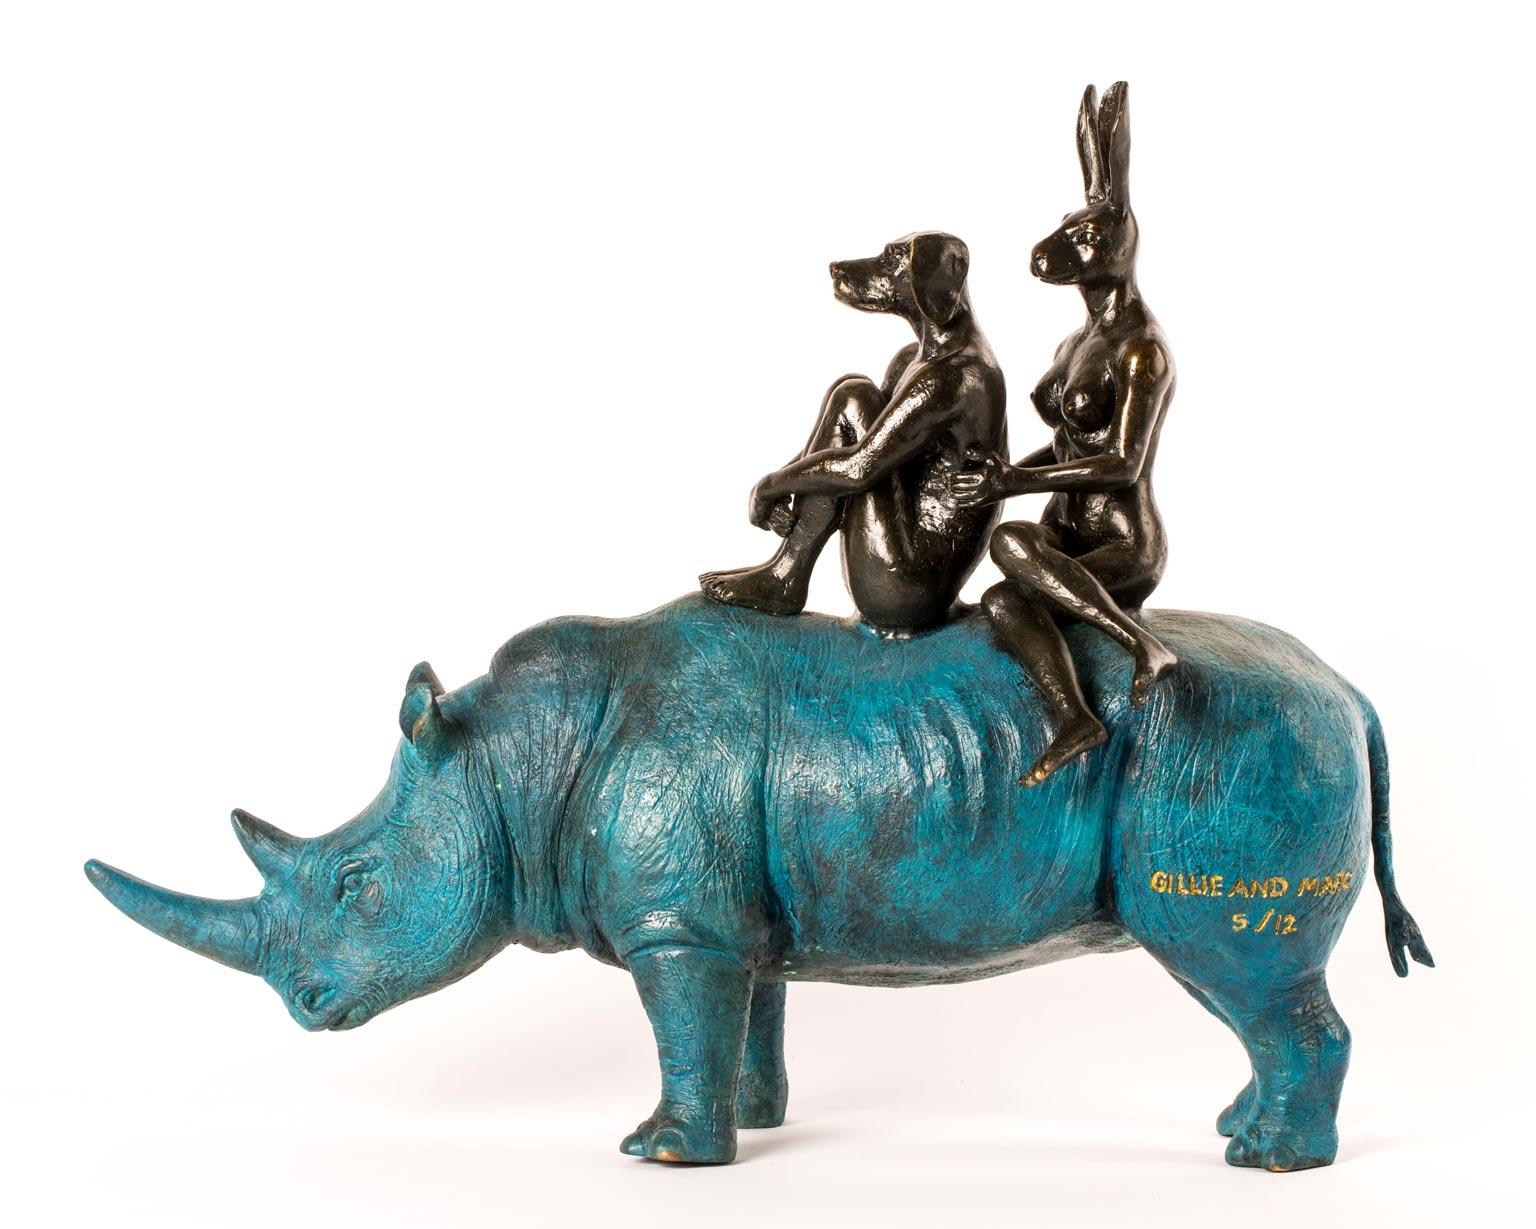 Title: They were happy rhino riders
Authentic bronze sculpture
Limited Edition

World Famous Contemporary Artists: Husband and wife team, Gillie and Marc, are New York and Sydney-based contemporary artists who collaborate to create artworks as one.